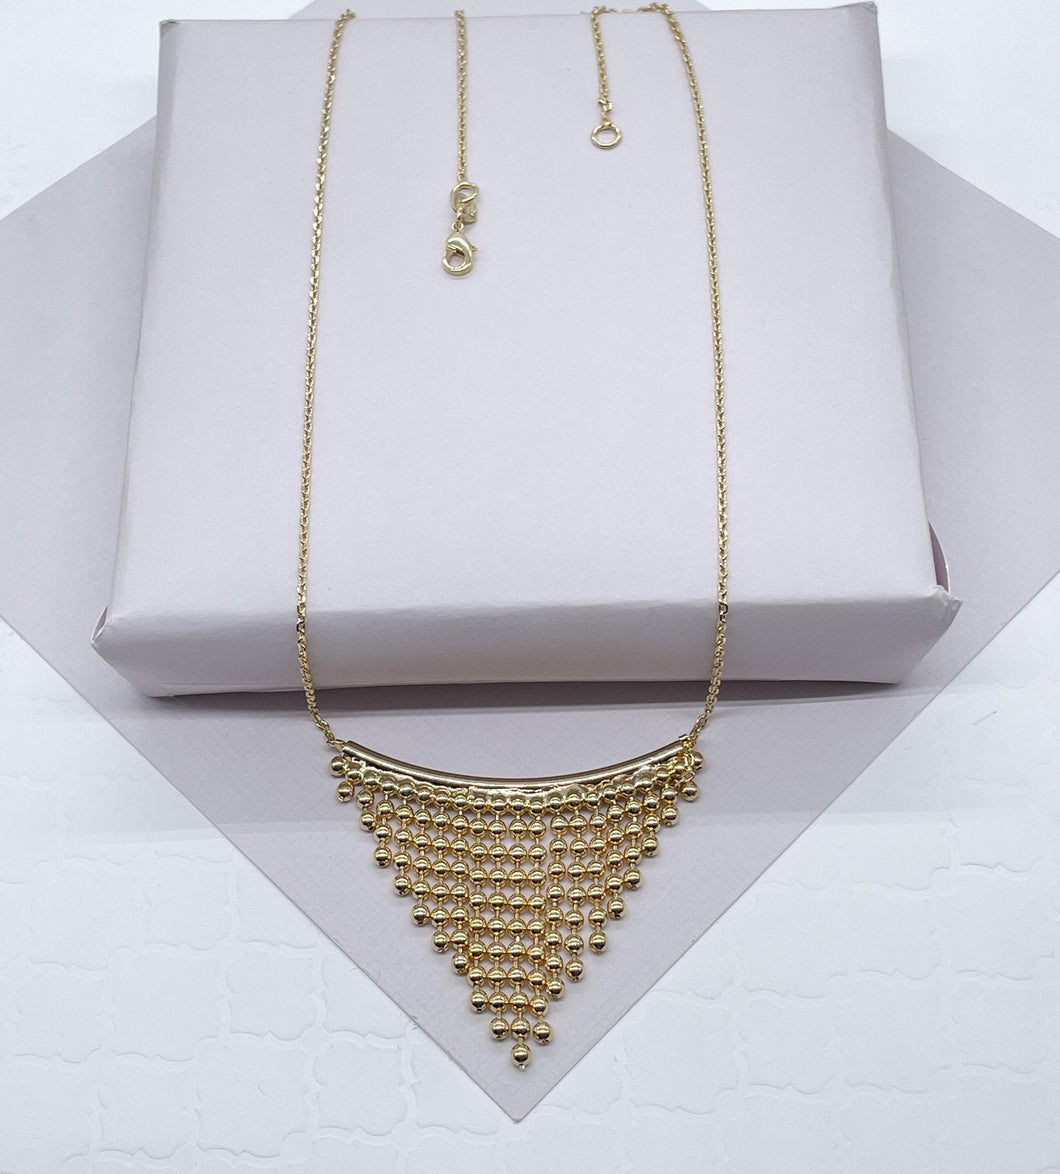 18k Gold Filled Boho Chain Necklace Fringe Dangling Beads, Mesh Inverted Gold Triangle,  ,